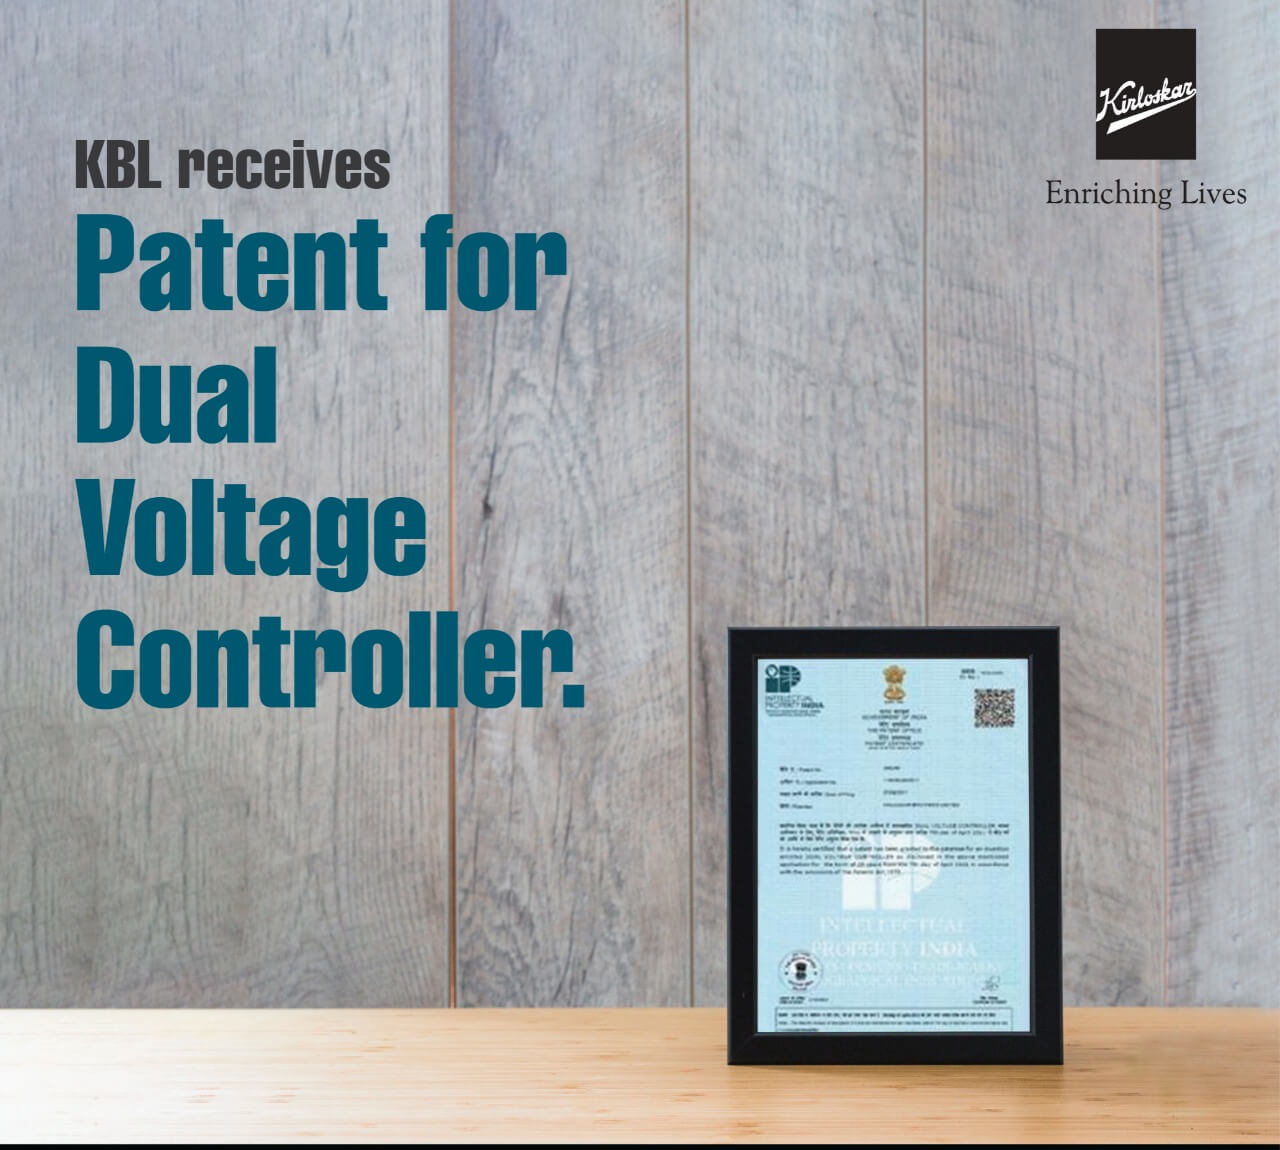 KBL receives patent for Dual Voltage Controller